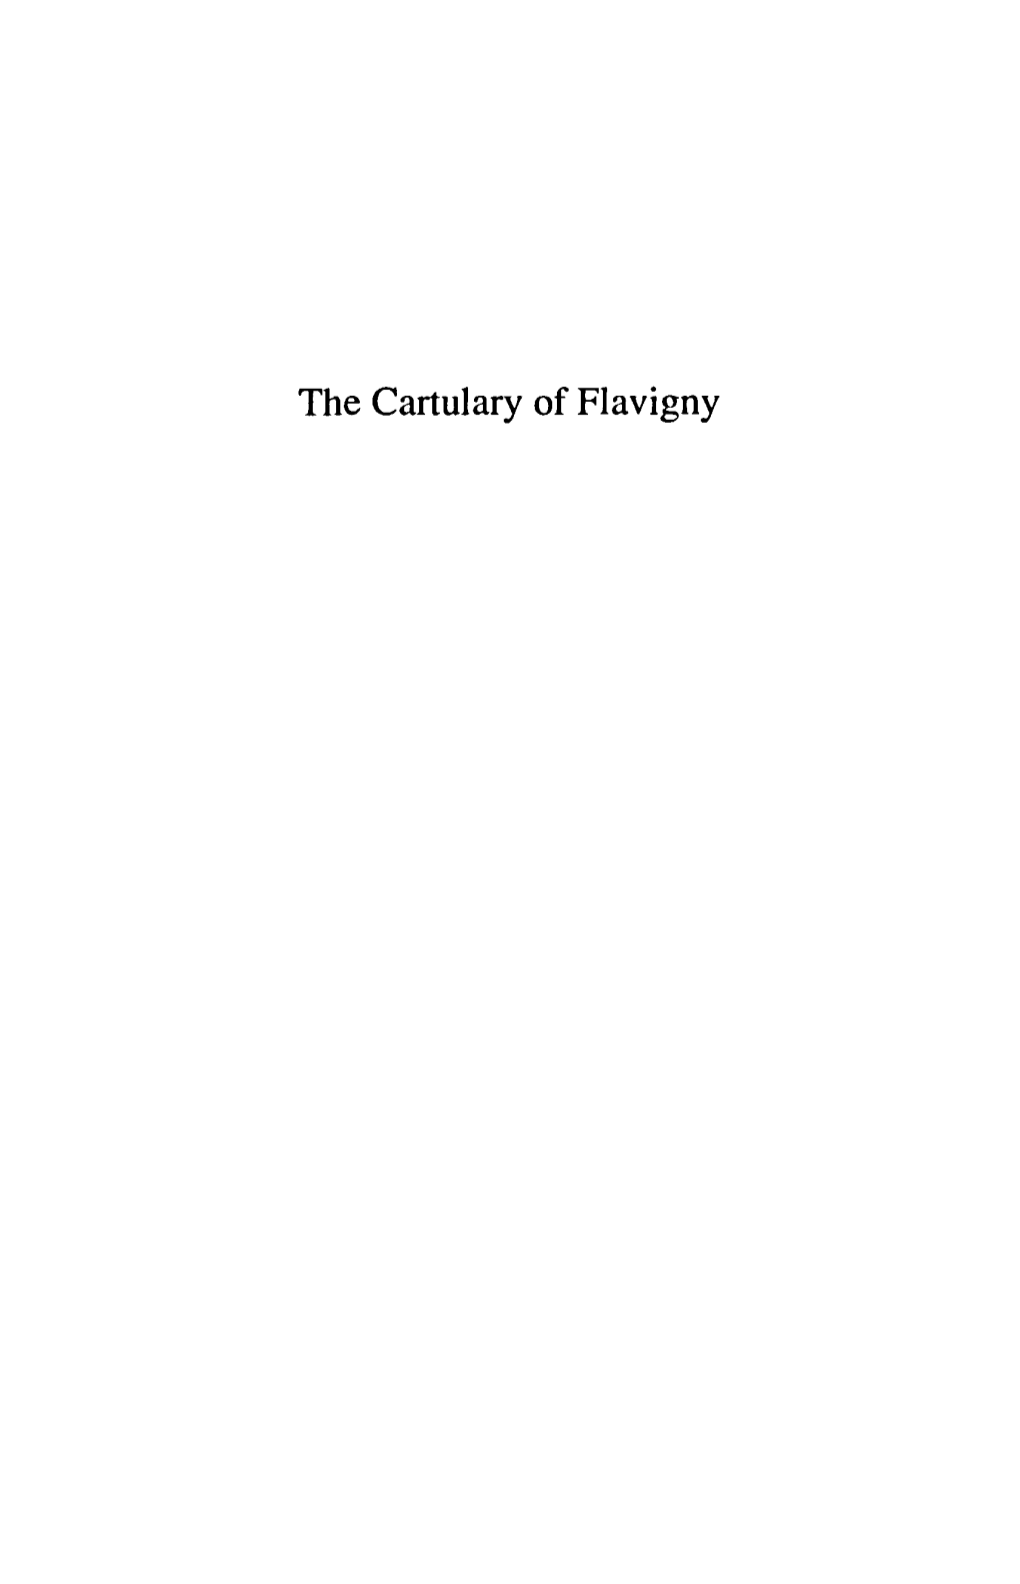 Bouchard, Constance Brittain/ the Cartulary of Flavigny, 717–1113